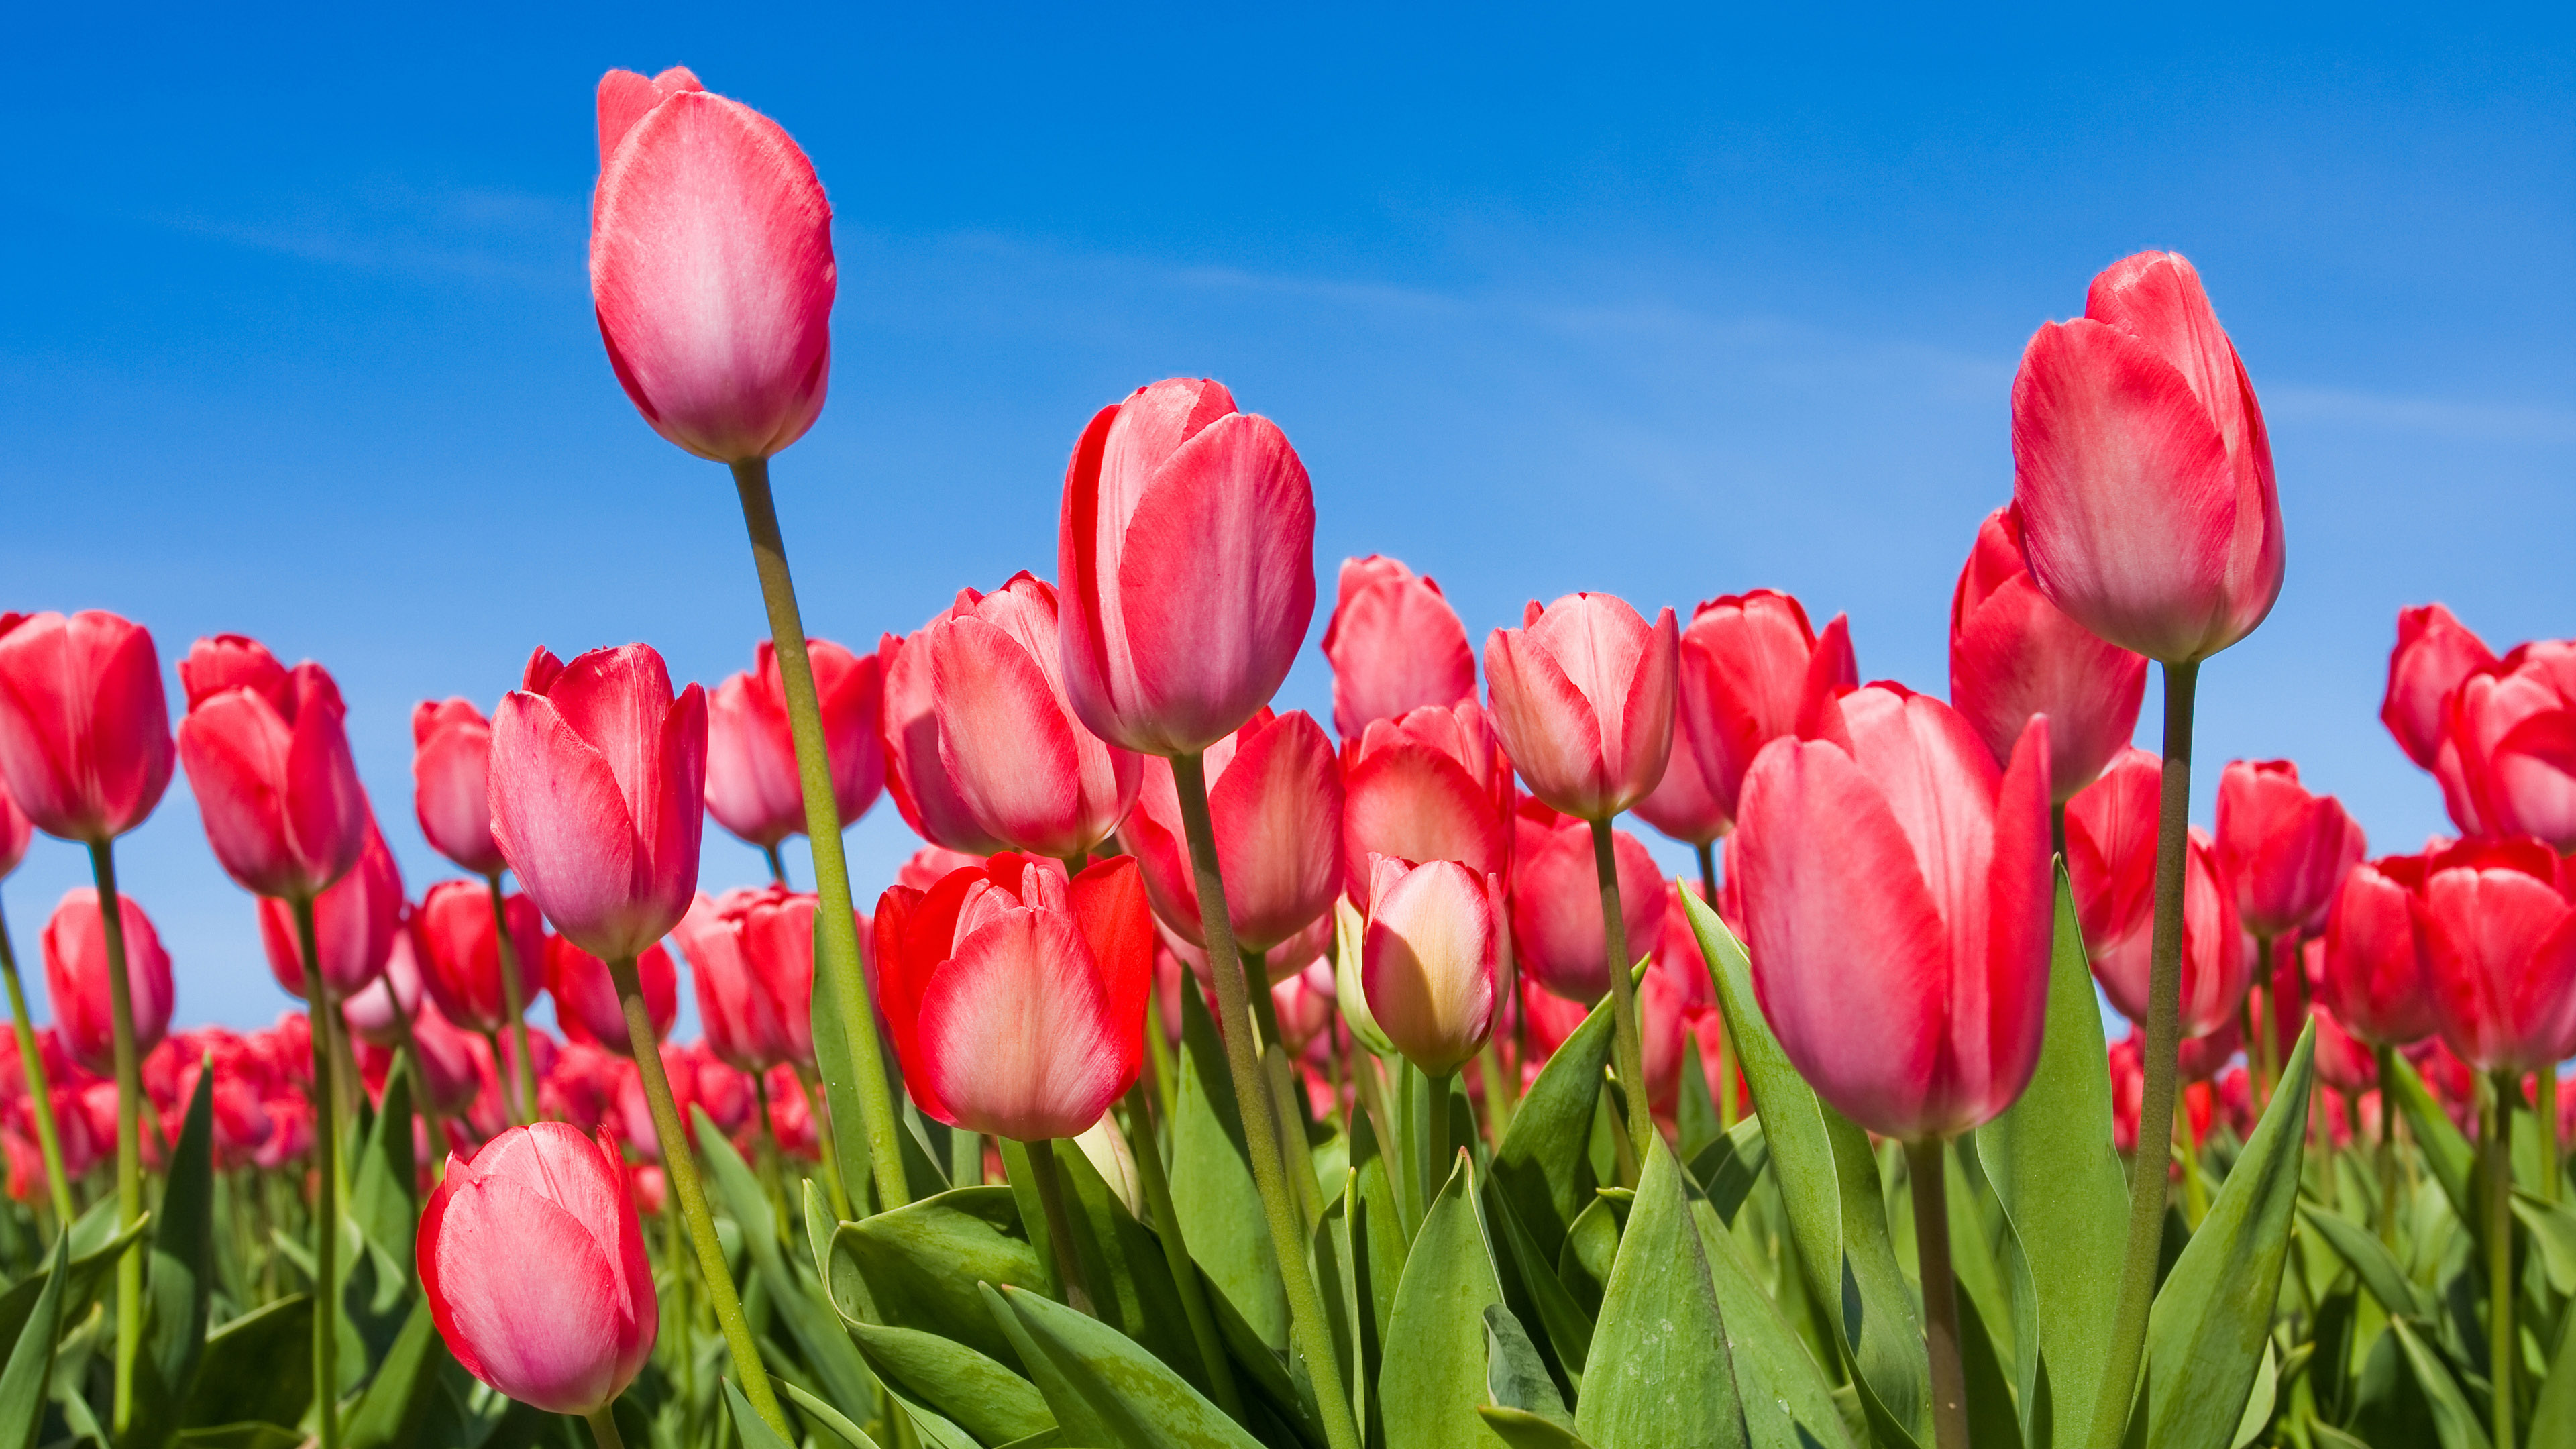 10 Top desktop wallpaper flowers tulips You Can Save It At No Cost ...